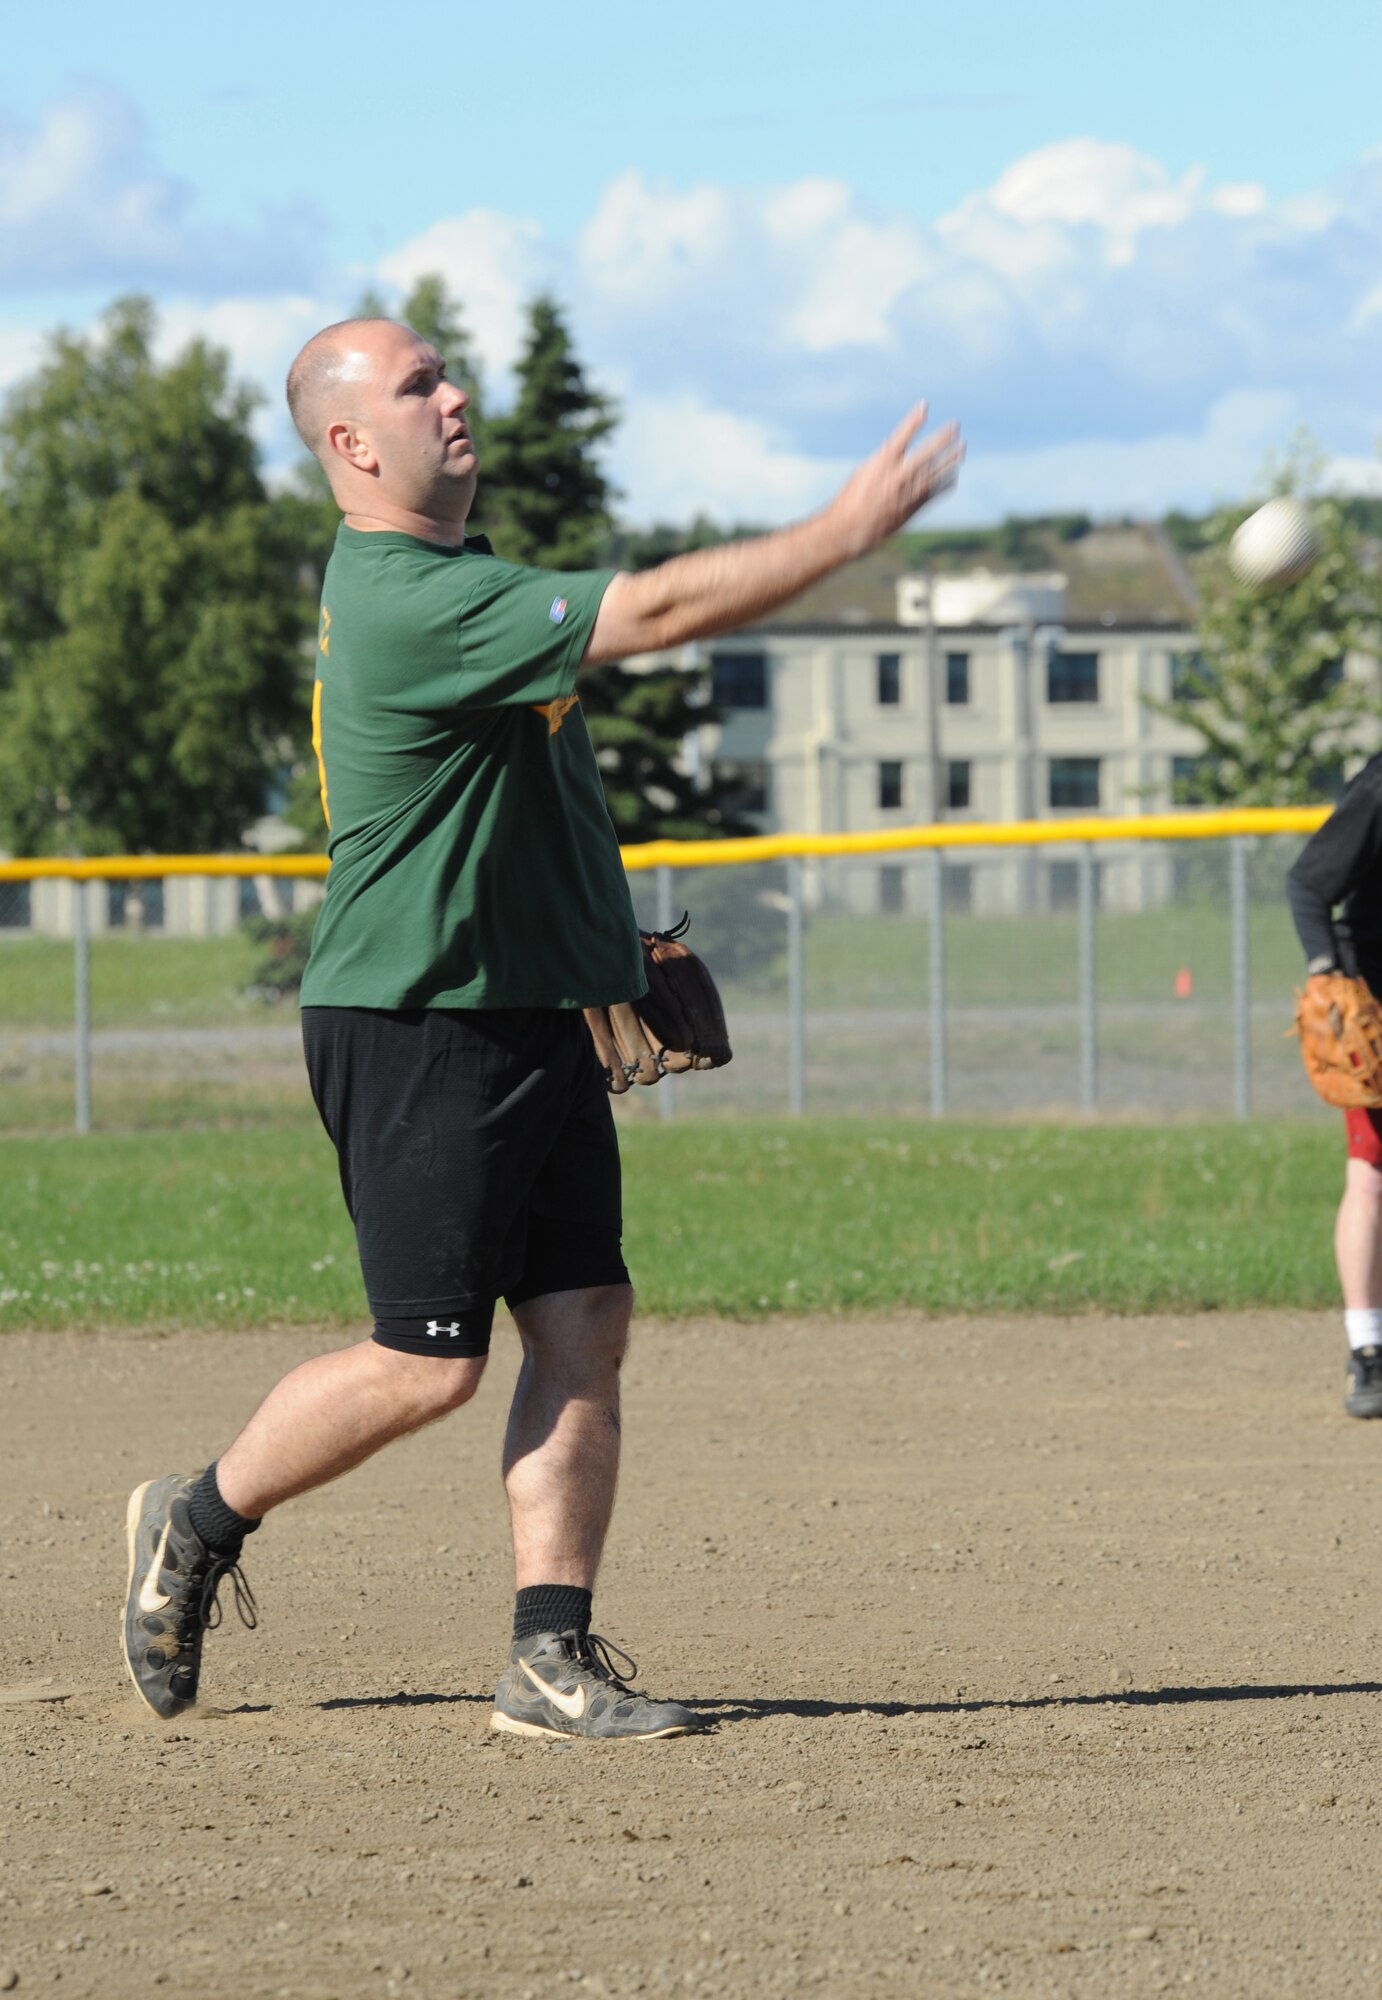 ELMENDORF AIR FORCE BASE, Alaska -- Jeremy Edwards, 381st Intelligence Squadron, pitches to a member of the 19th Fighter Squadron August 6.The 381st IS went head to head with the 19th Fighter Squadron Gamecocks in a bid for the Intramural Softball Championship game. The 381st IS won the championship game finishing the season with a record of 10-1. (U.S. Air Force photo/Airman 1st Class Matthew Owens)